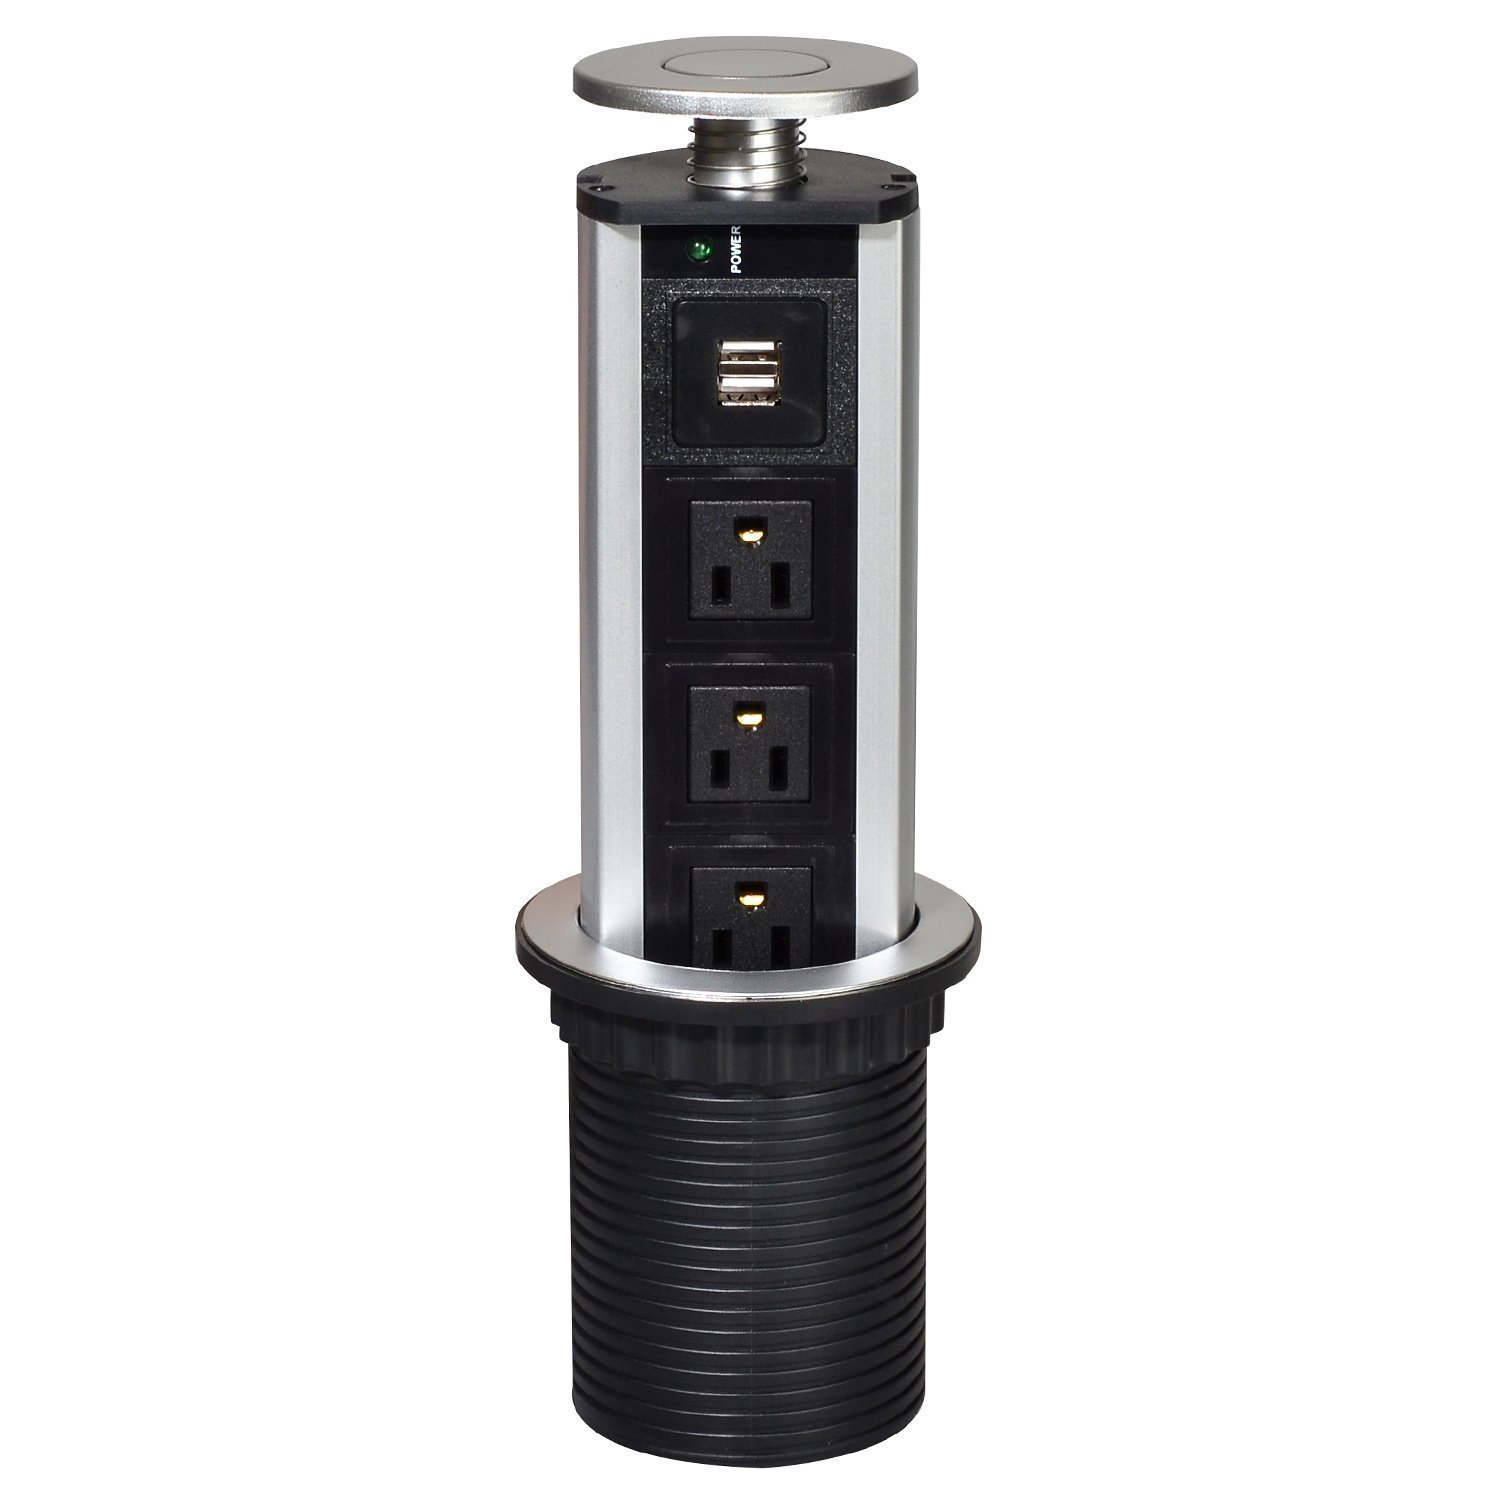 Ahyuan Pulling Pop Up USB Outlet, Tabletop Safe Hidden Outlet for Office, Meetin